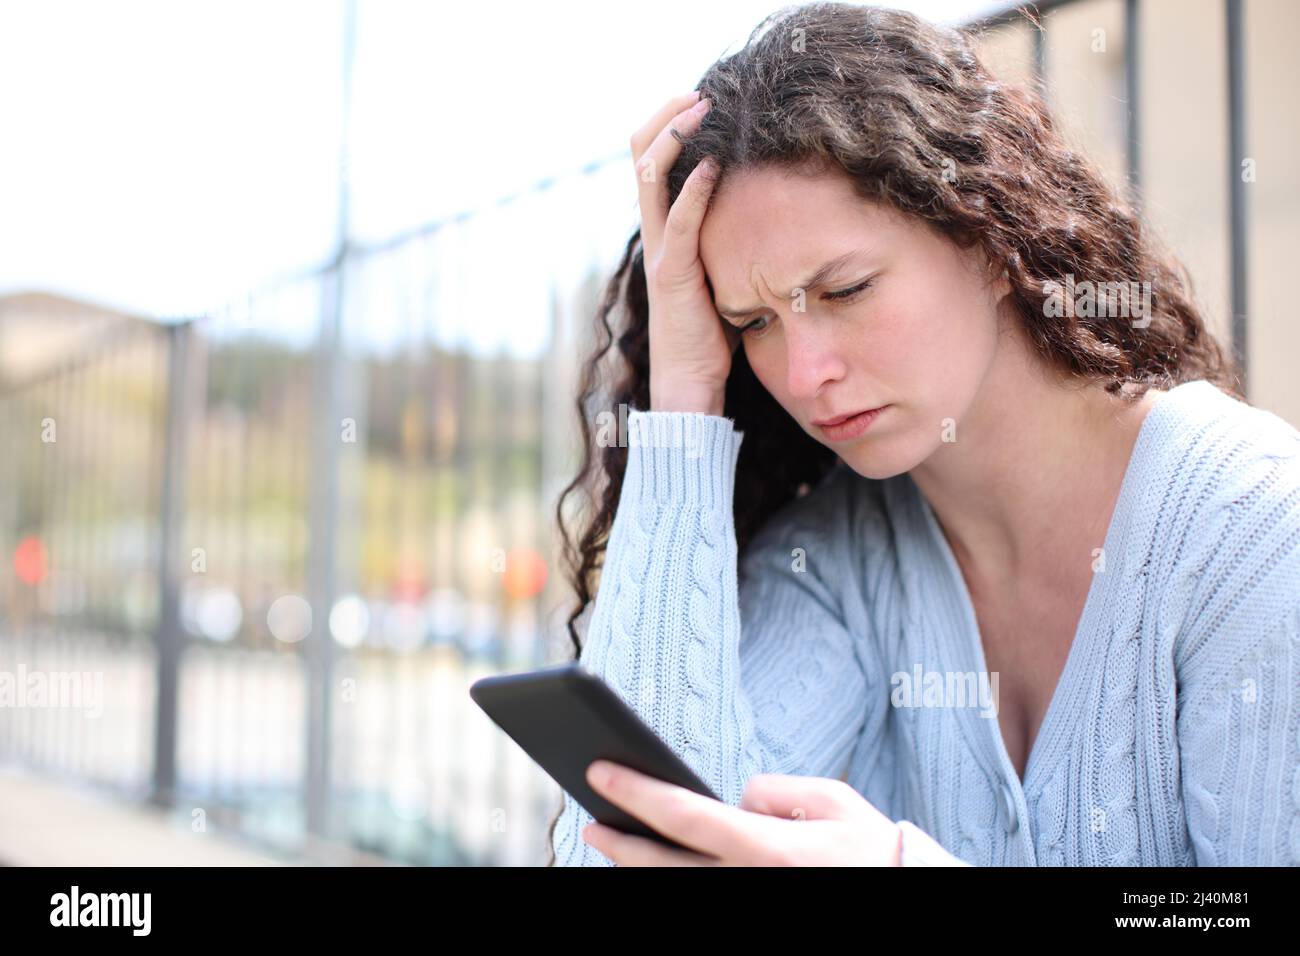 Worried woman checking cell phone sitting in the street Stock Photo